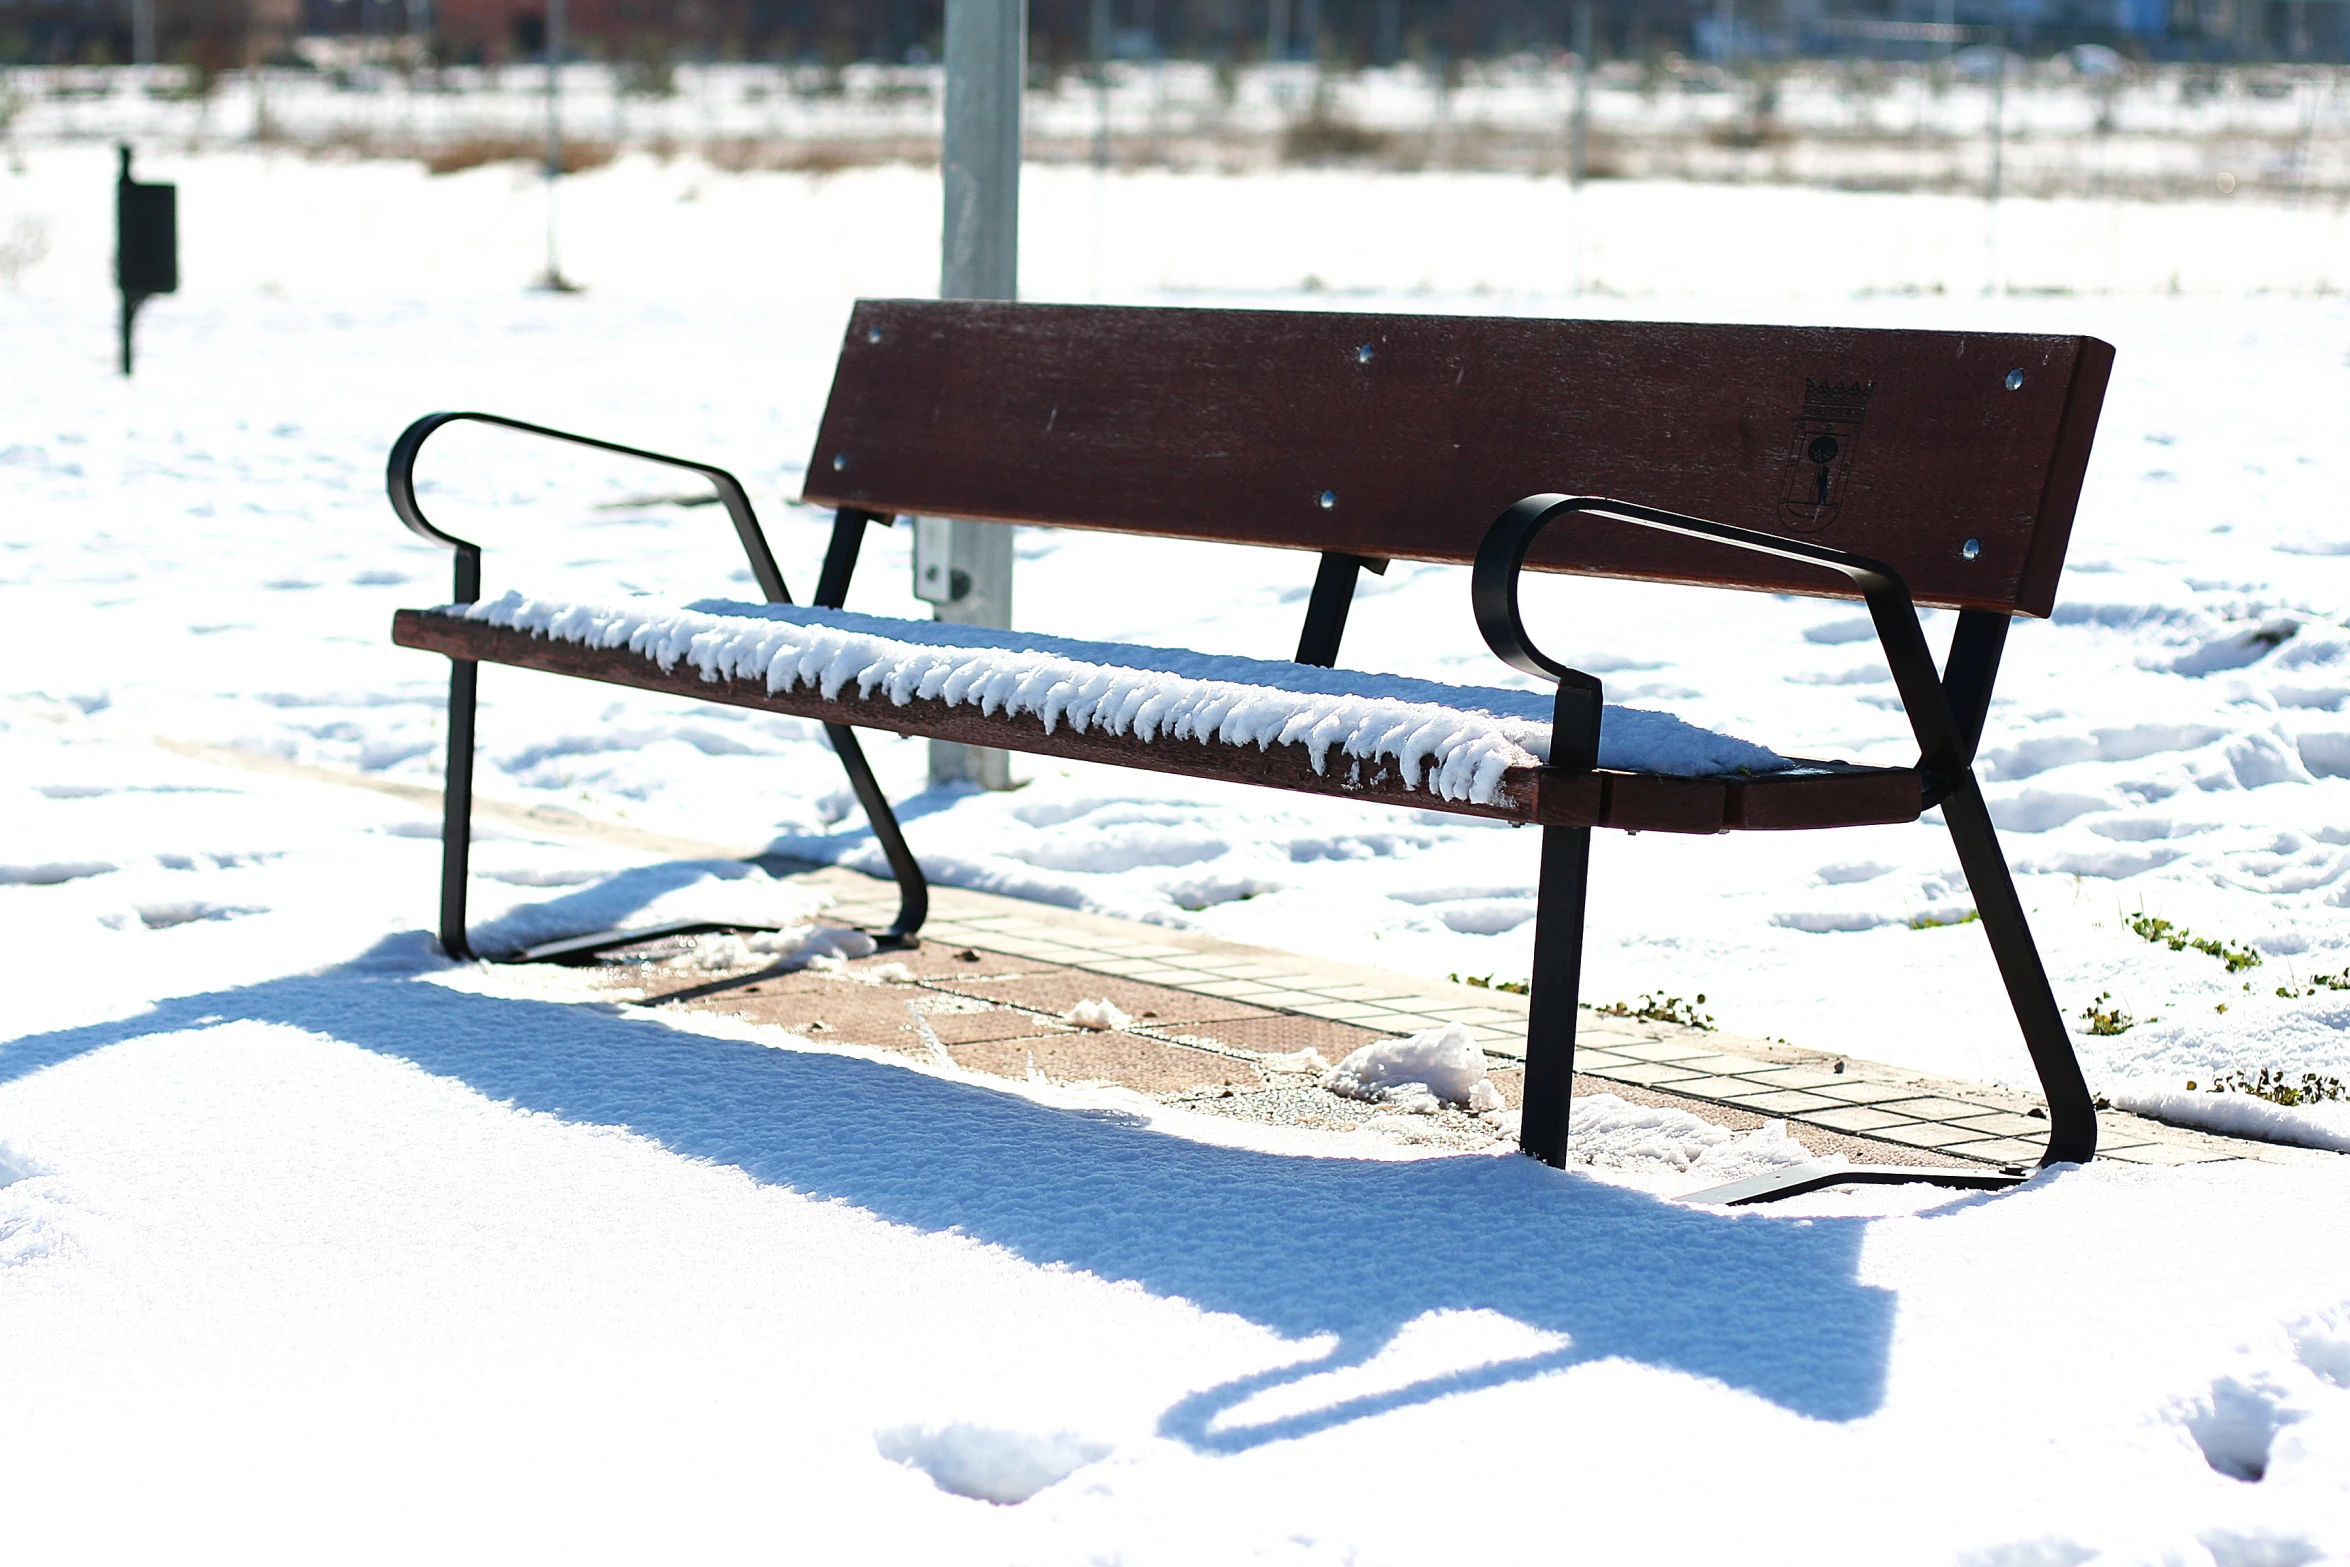 a bench in the middle of some snowy day